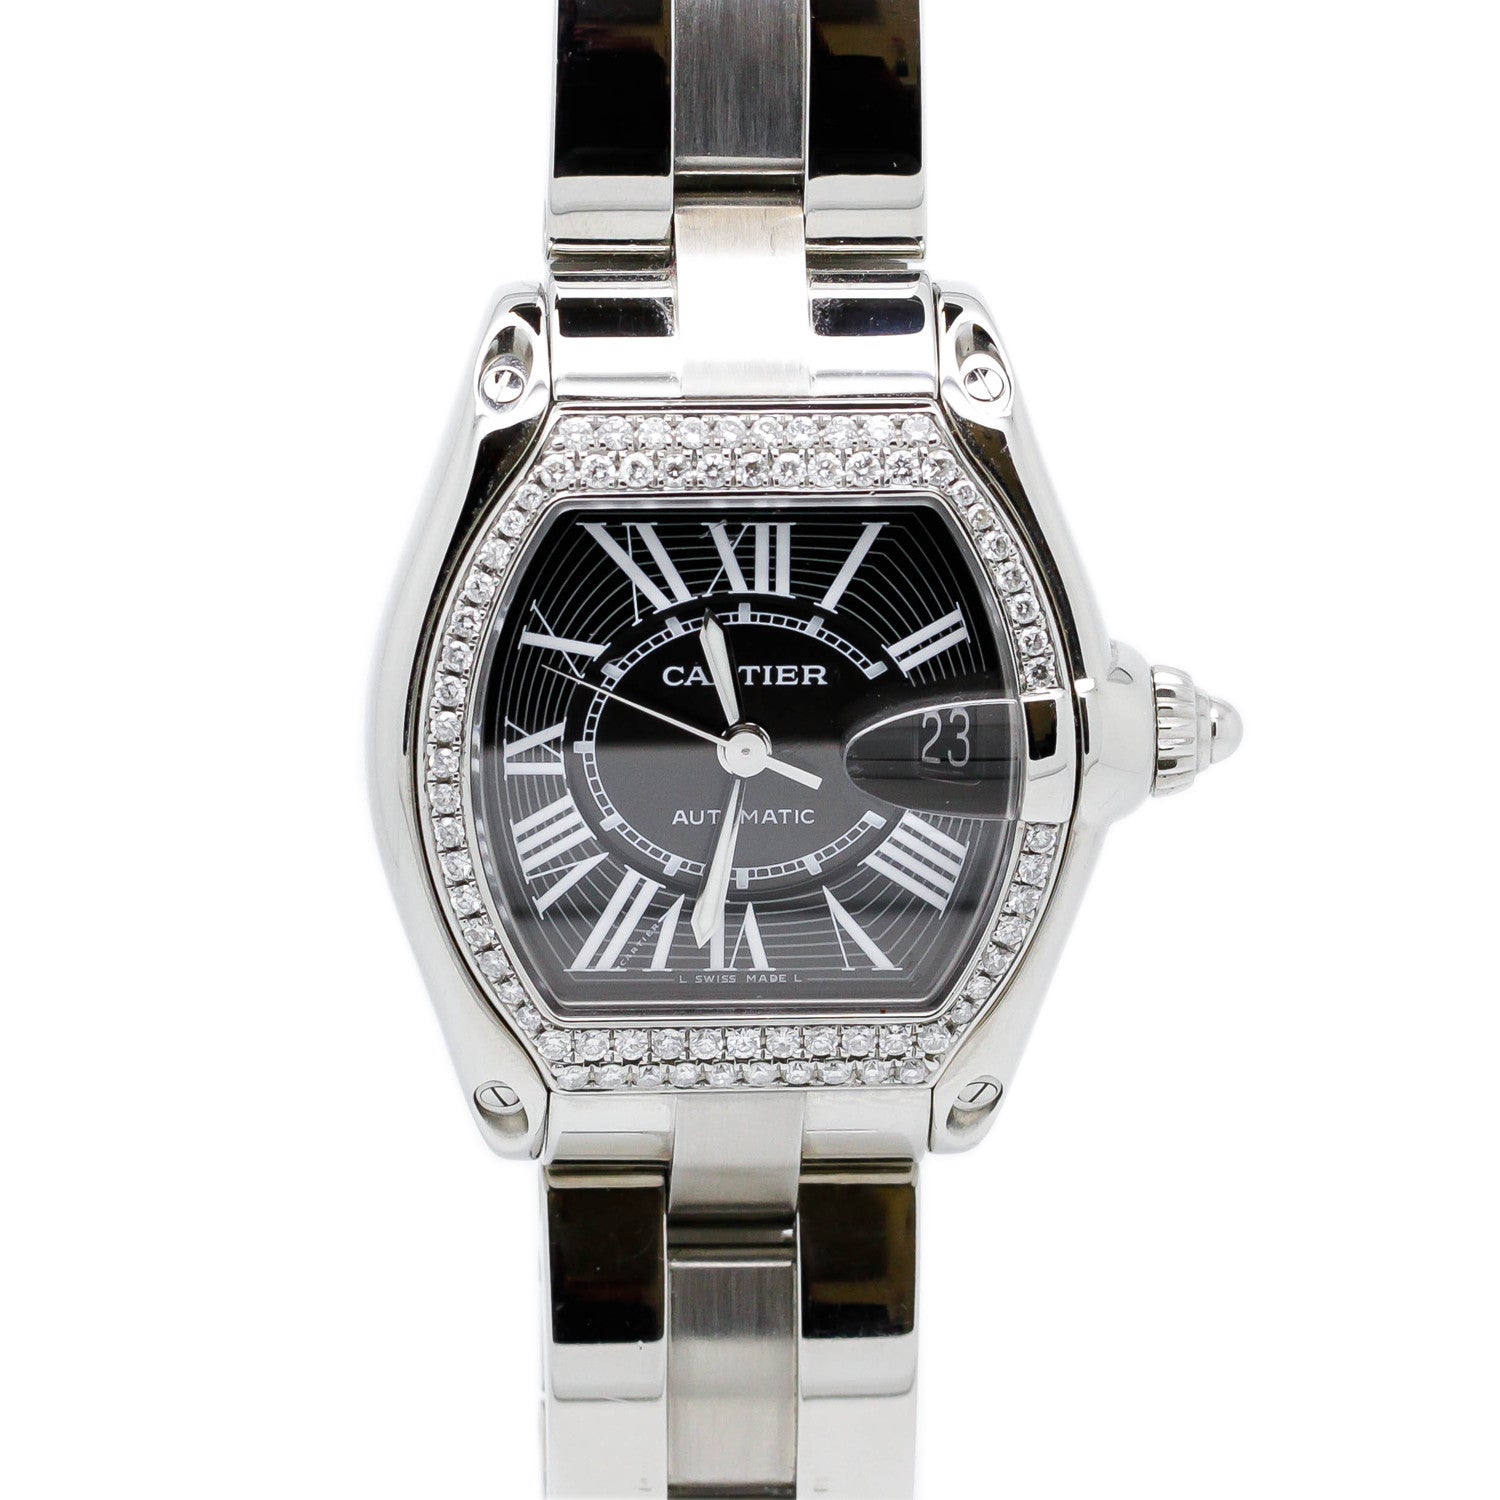 Cartier Roadster 2510 Stainless Steel Automatic 36mm Mens Watch